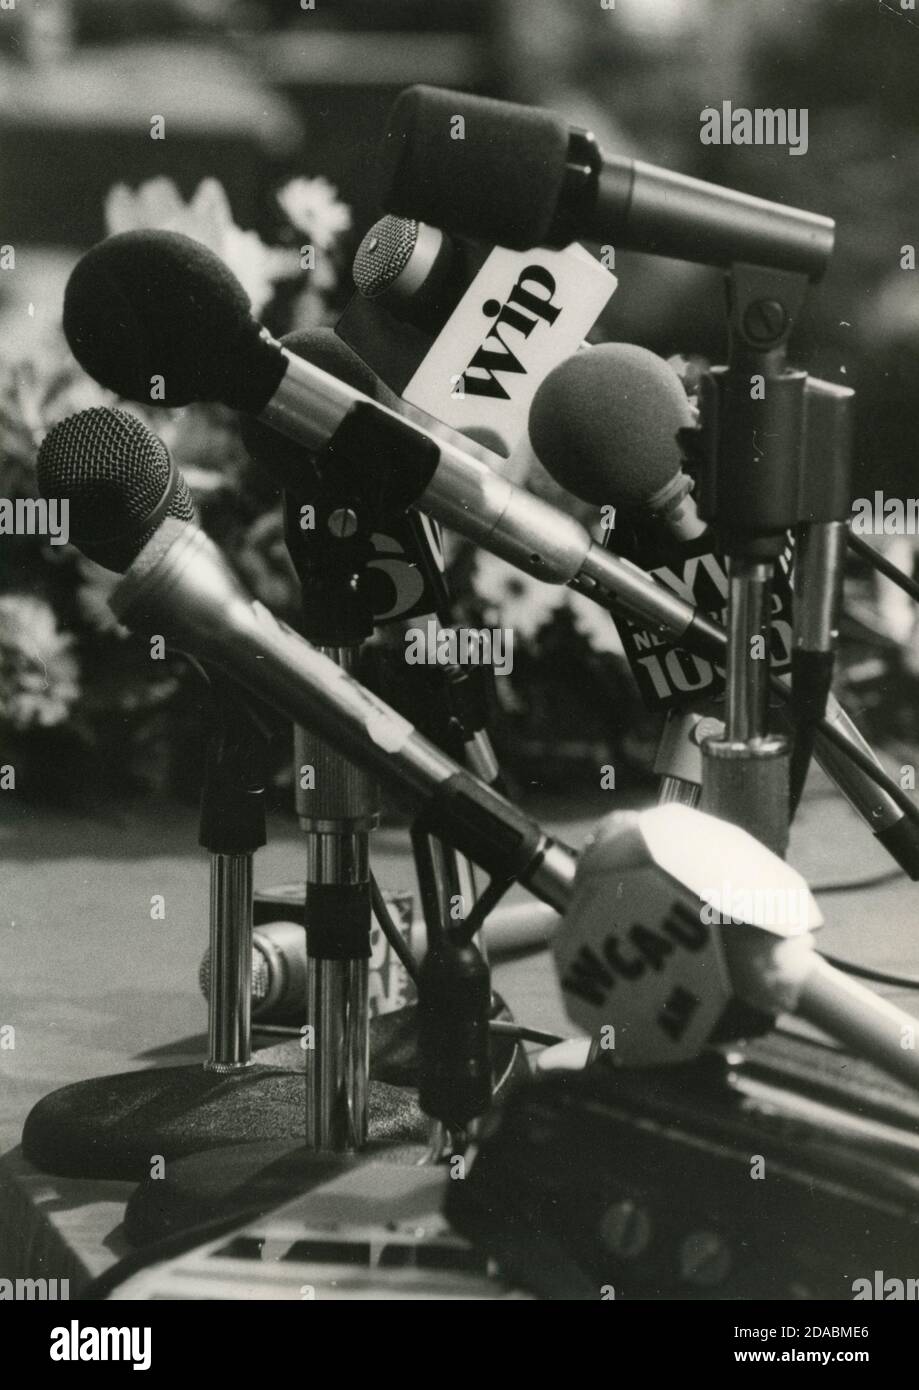 Microphones ready for the press conference, 1988 Stock Photo